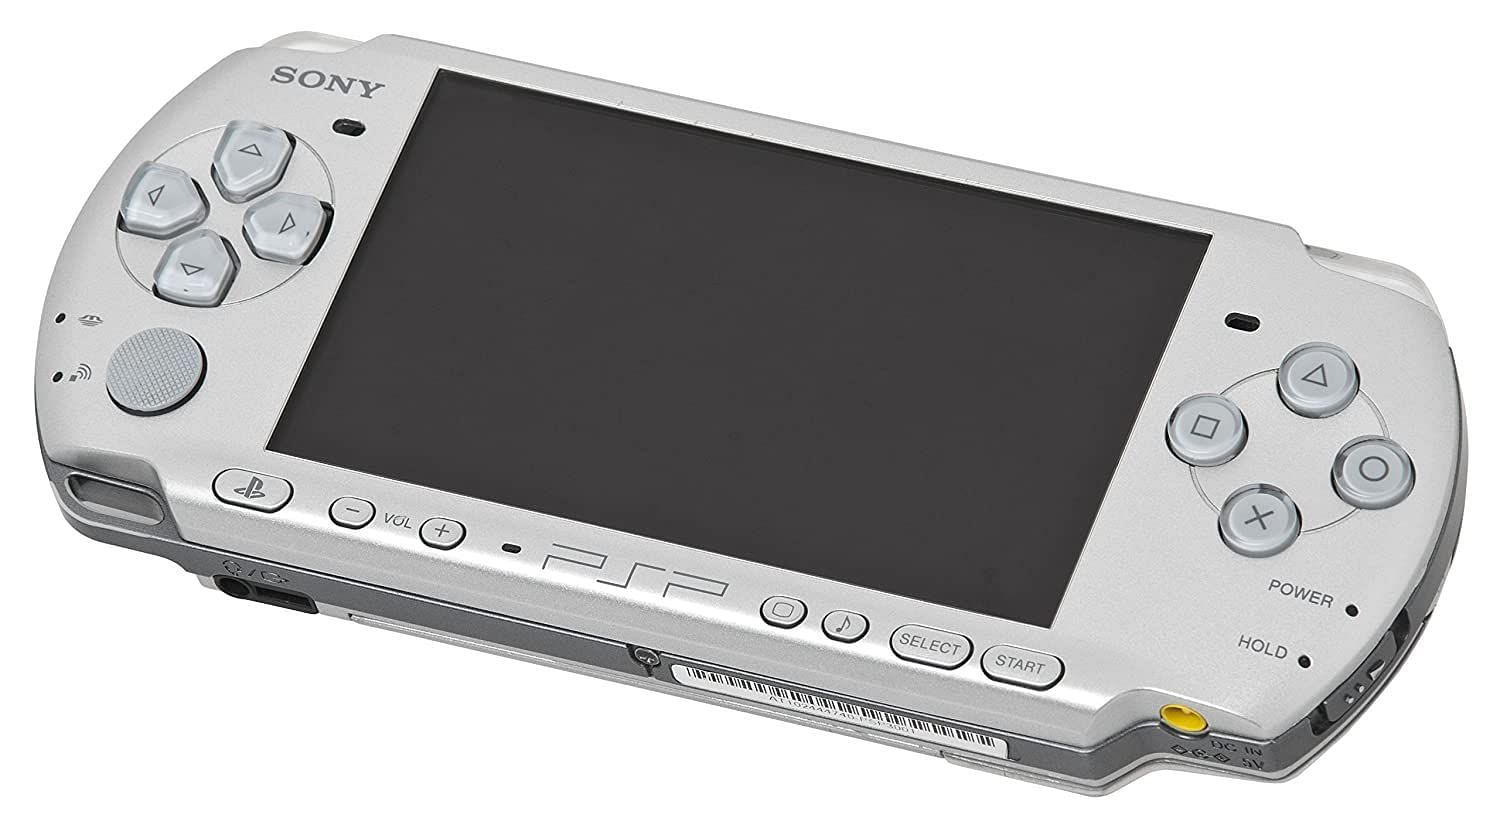 VCS was on the PSP, which was the only advantage it had over VC (Image via Amazon)